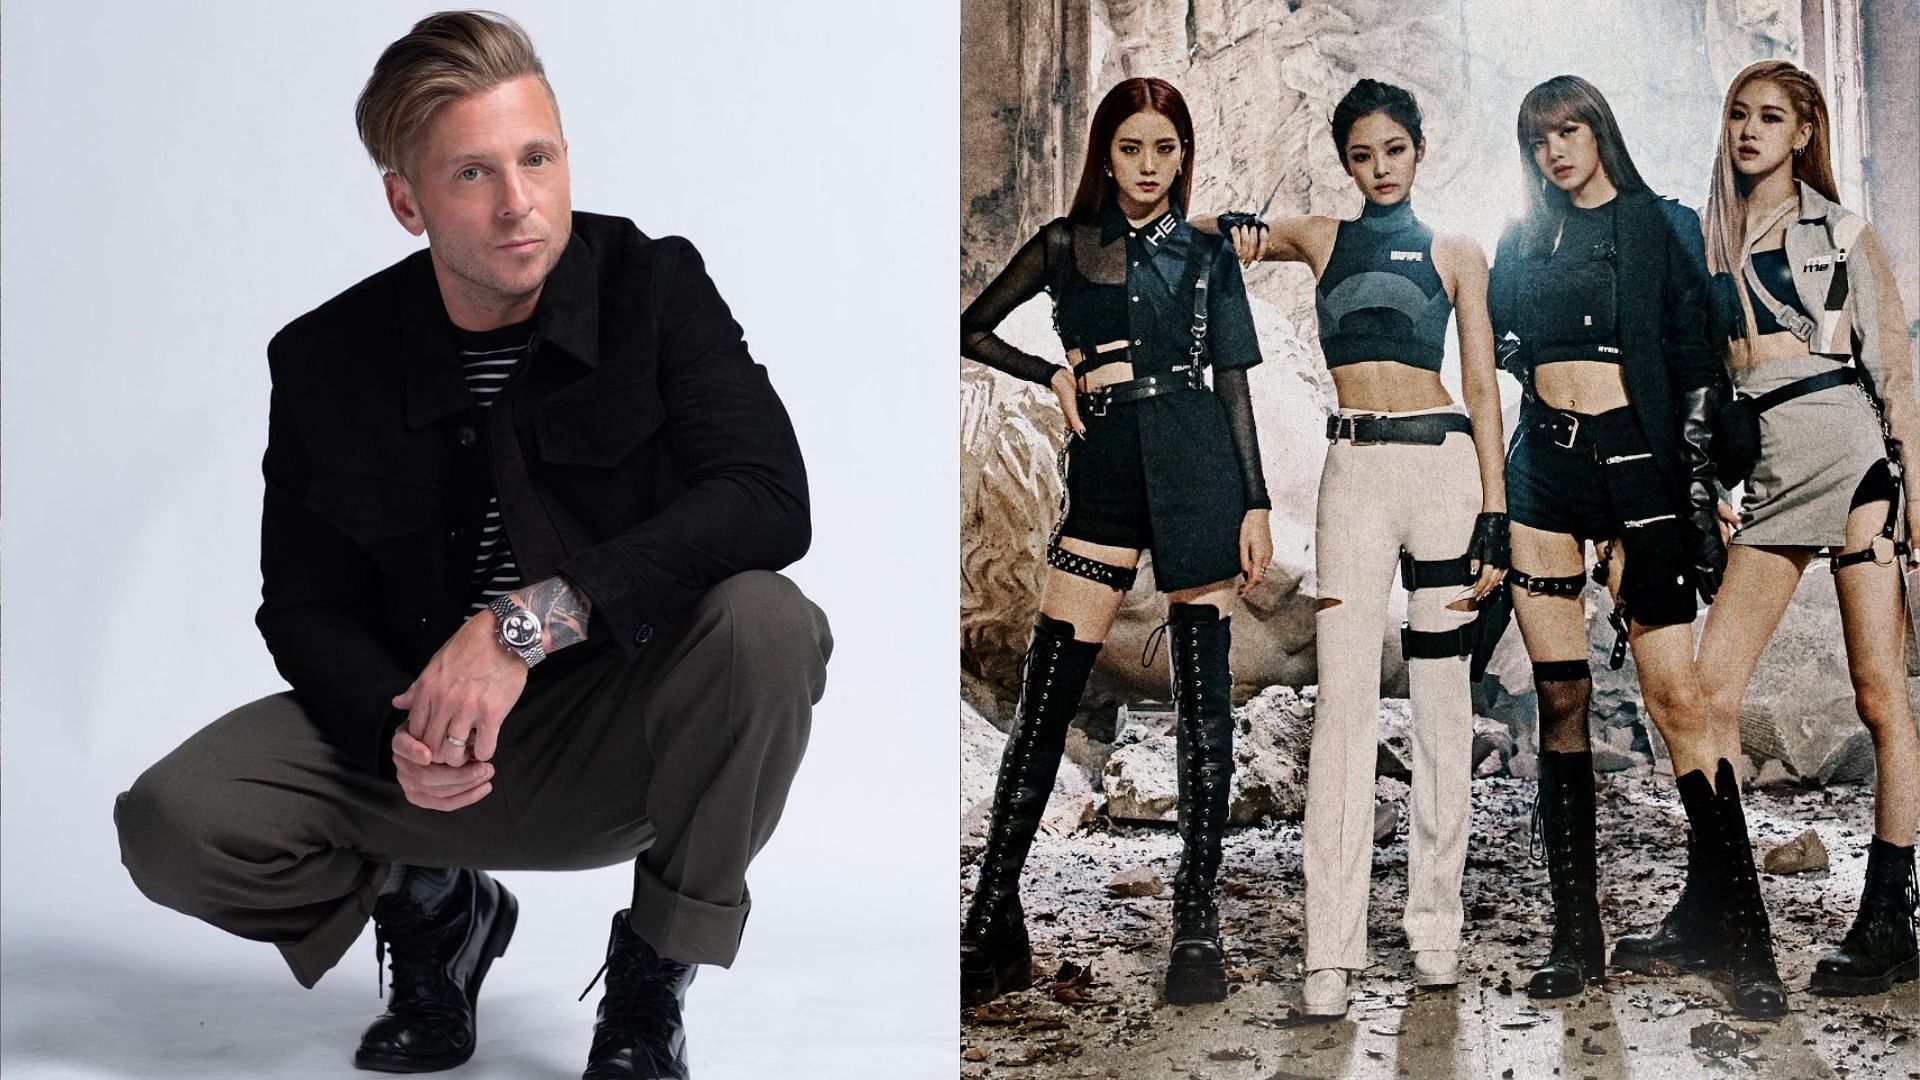 OneRepublic&#039;s Ryan Tedder confirms collaboration with BLACKPINK (Images via Instagram/@ryantedder and Twitter/@ygent_official)